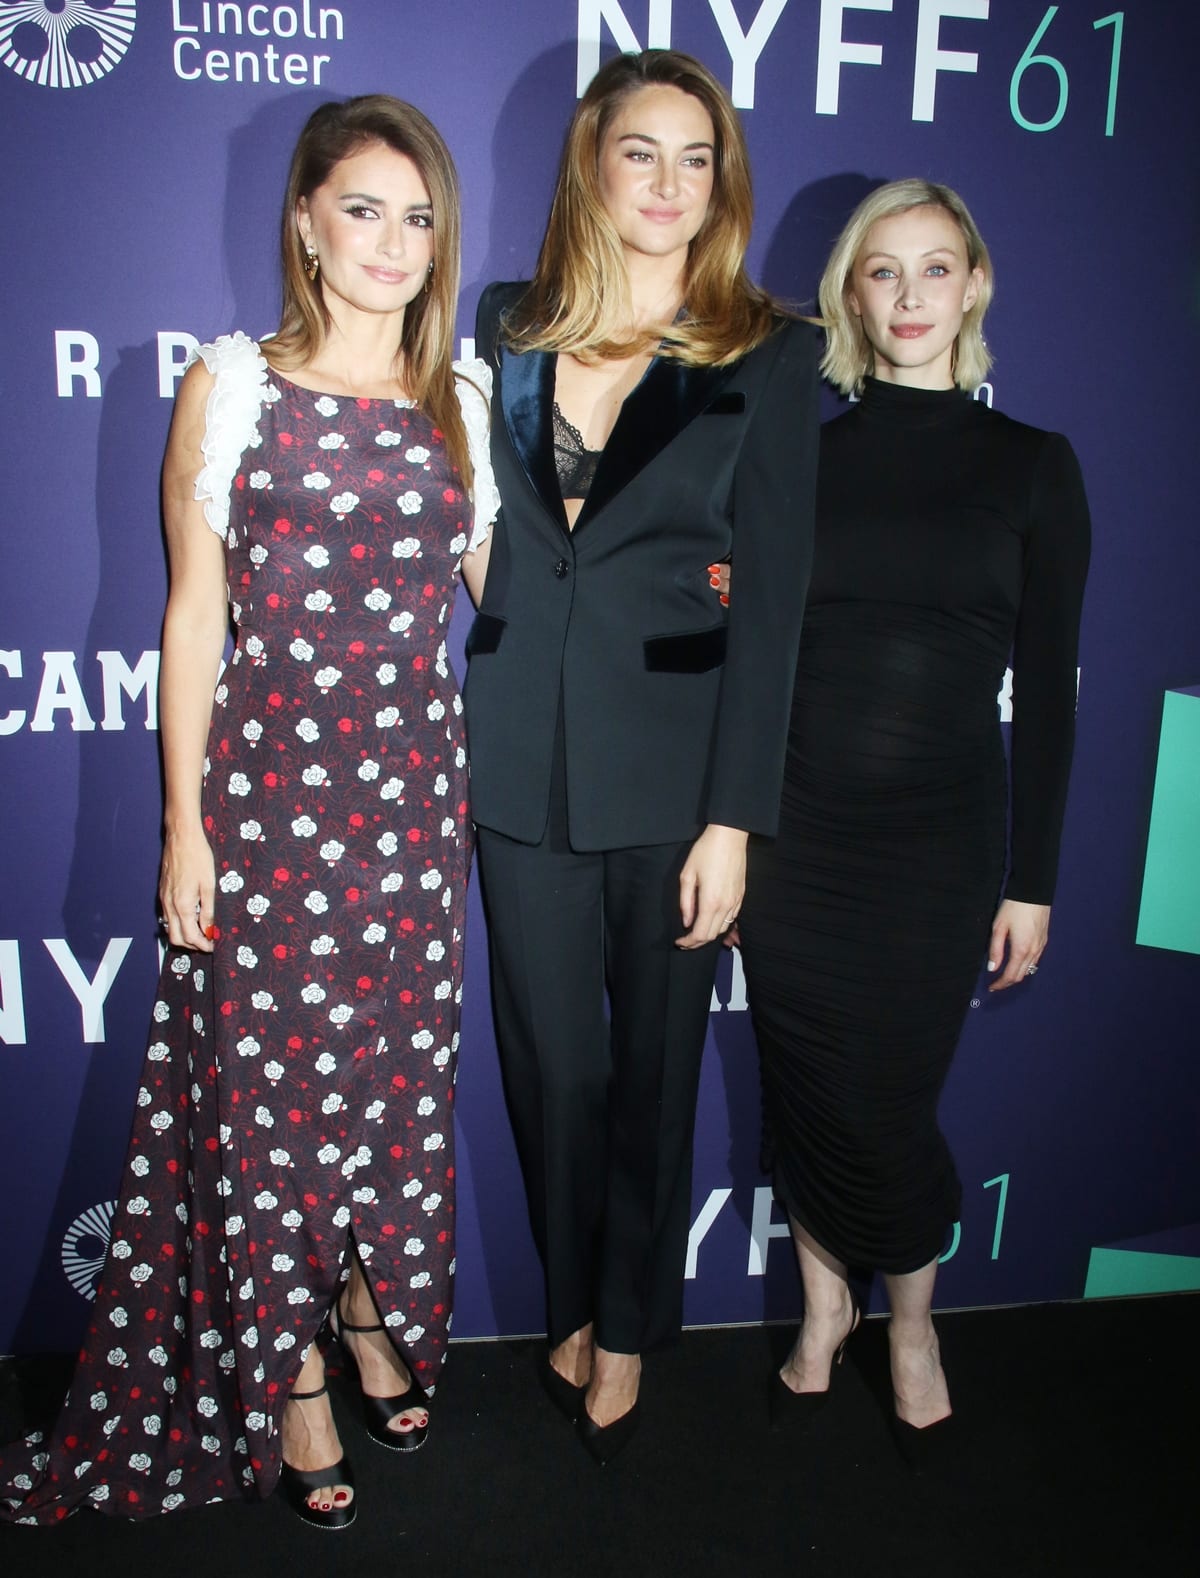 Penélope Cruz, Shailene Woodley, and Sarah Gadon attend the red carpet for "Ferrari" during the 61st New York Film Festival at Alice Tully Hall, Lincoln Center on October 13, 2023, in New York City